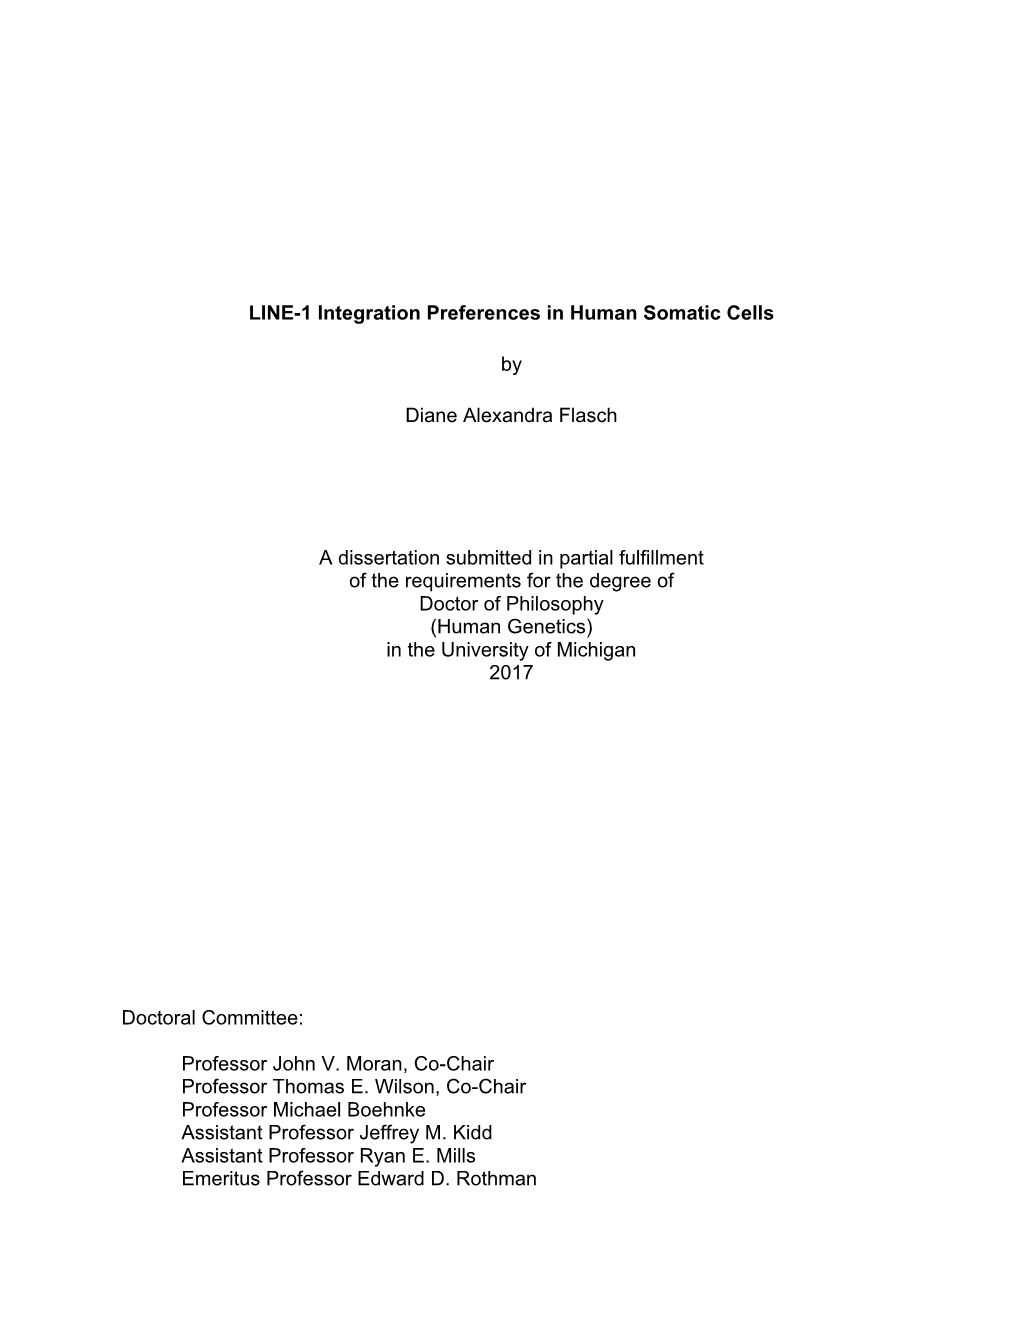 LINE-1 Integration Preferences in Human Somatic Cells by Diane Alexandra Flasch a Dissertation Submitted in Partial Fulfillment